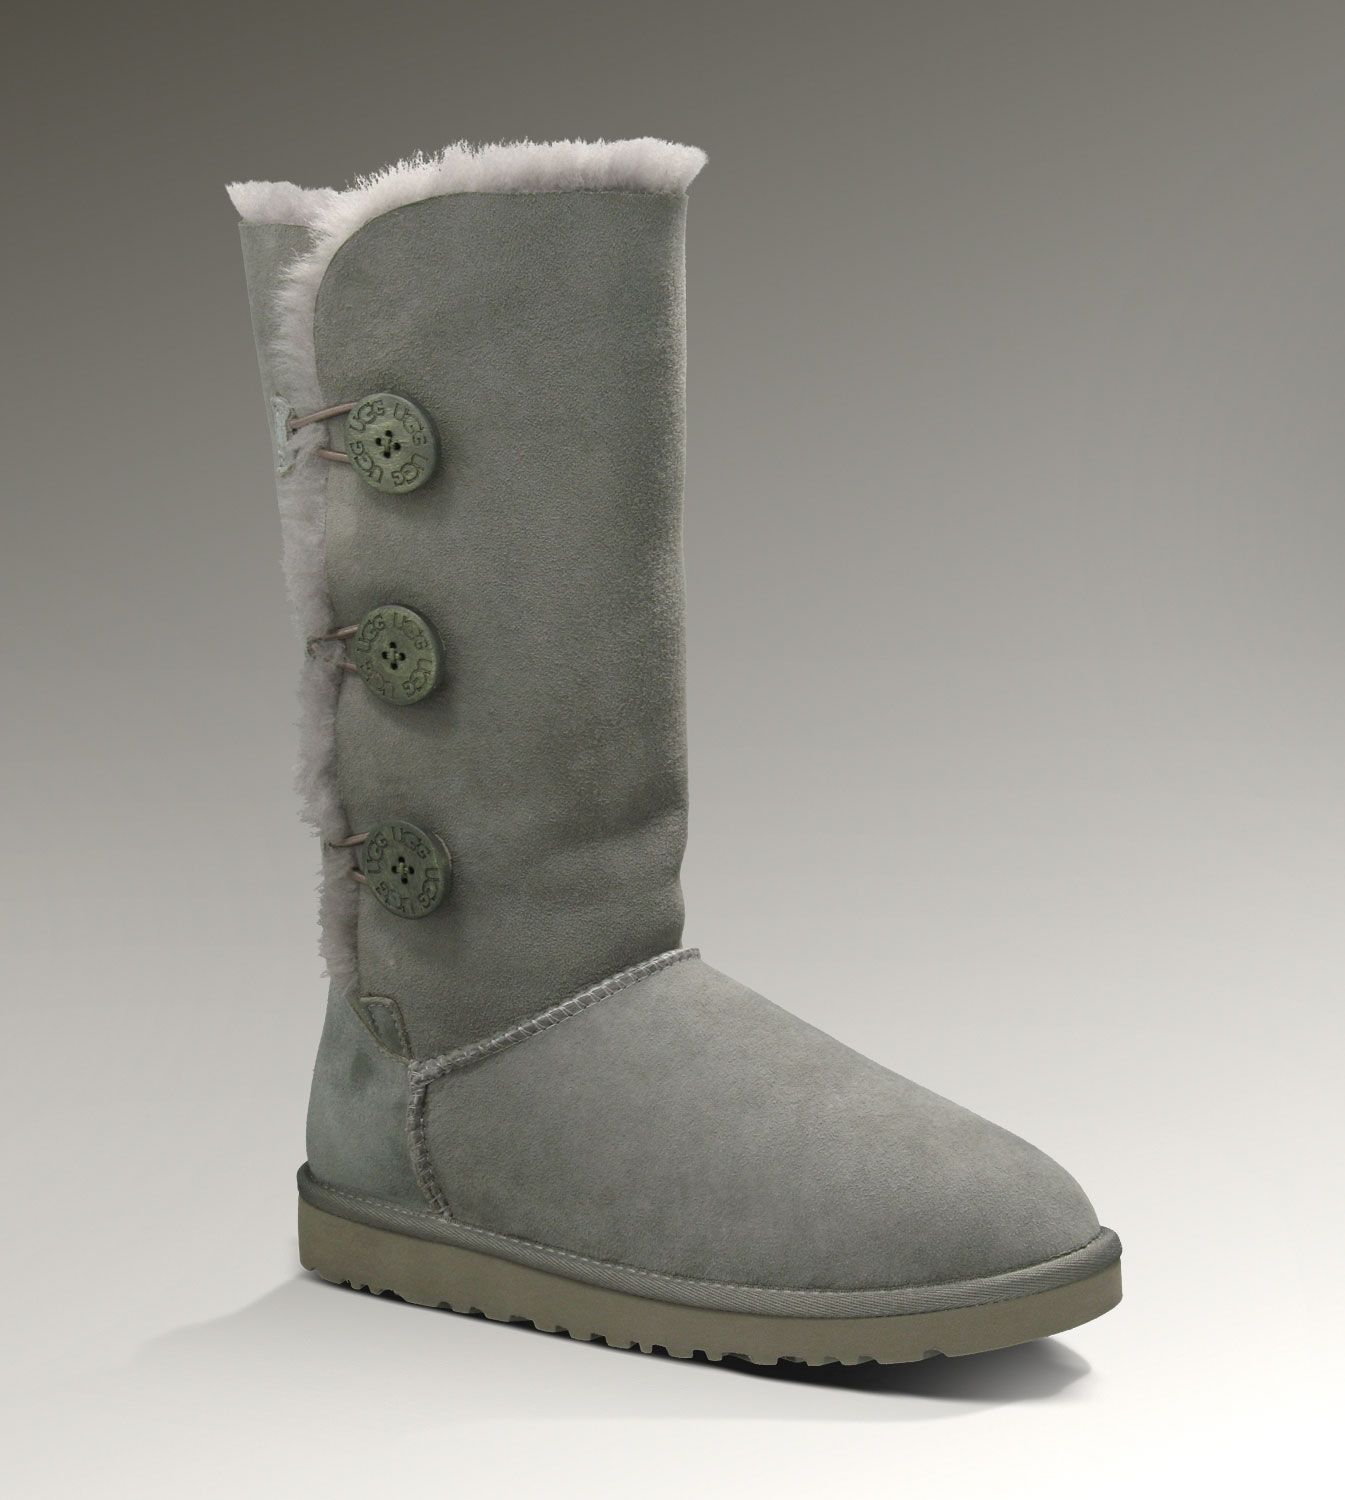 Ugg Womens Bailey Button Triplet Grey – UGGs Outlet With Elegant Design, Free Sh